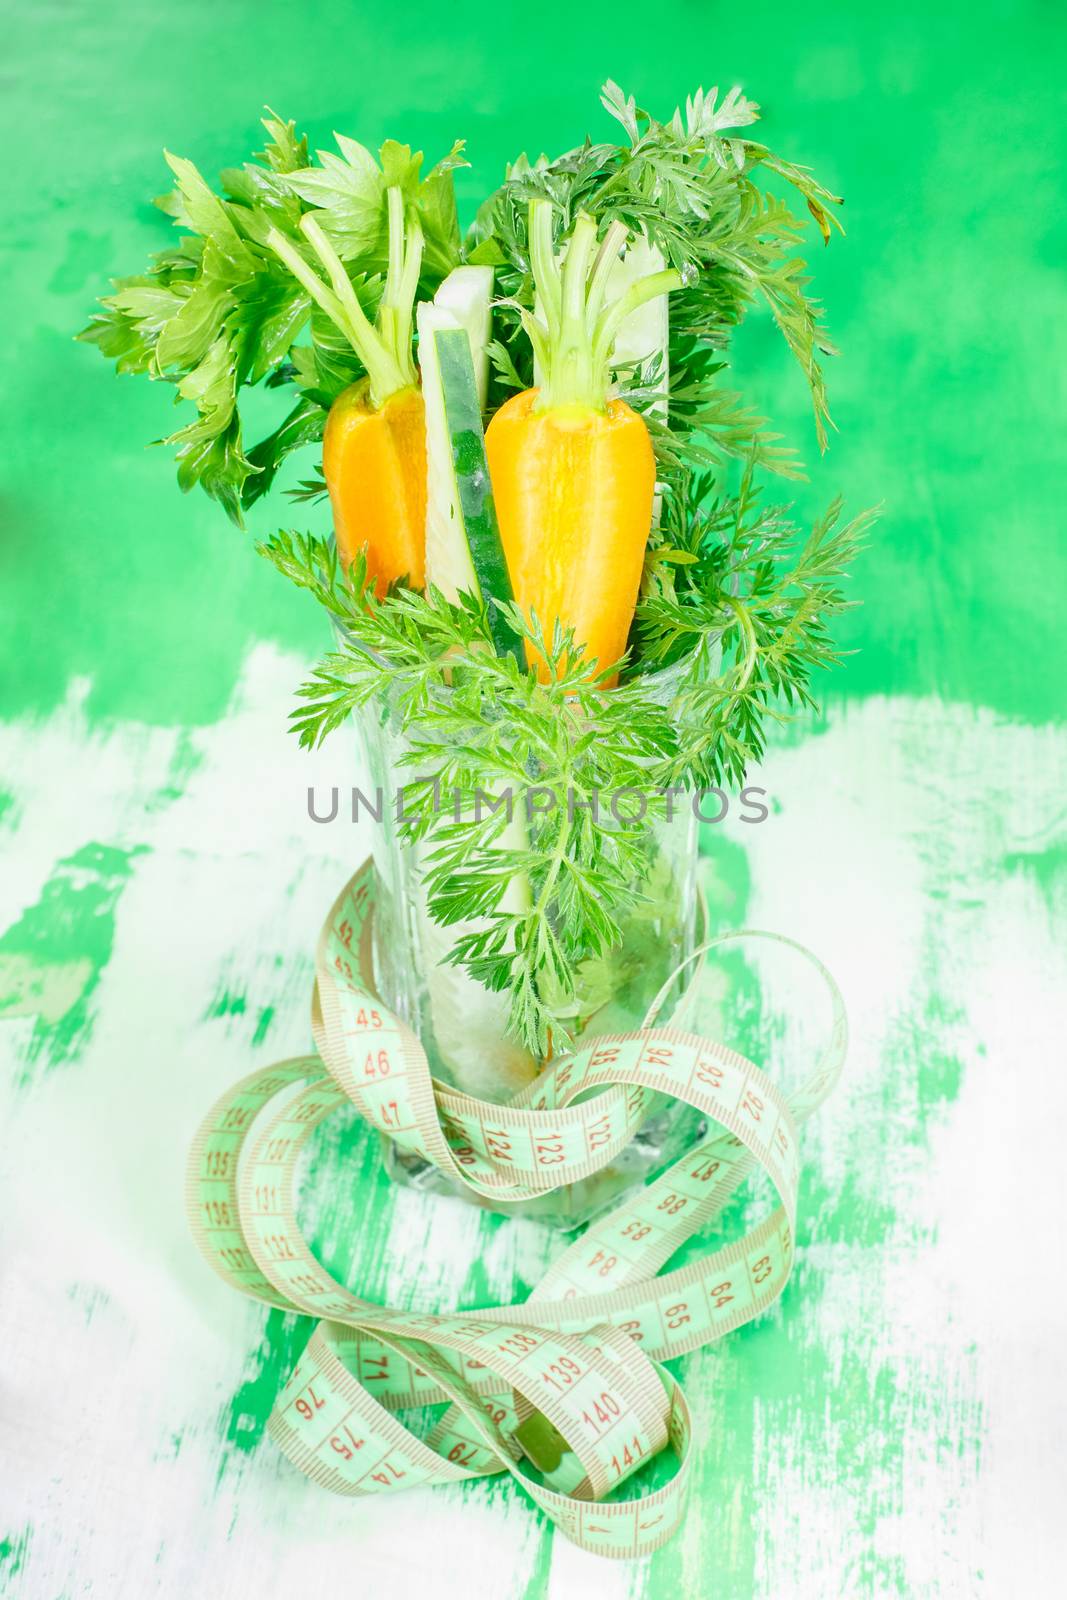 Healthy vegetables in a glass by Slast20